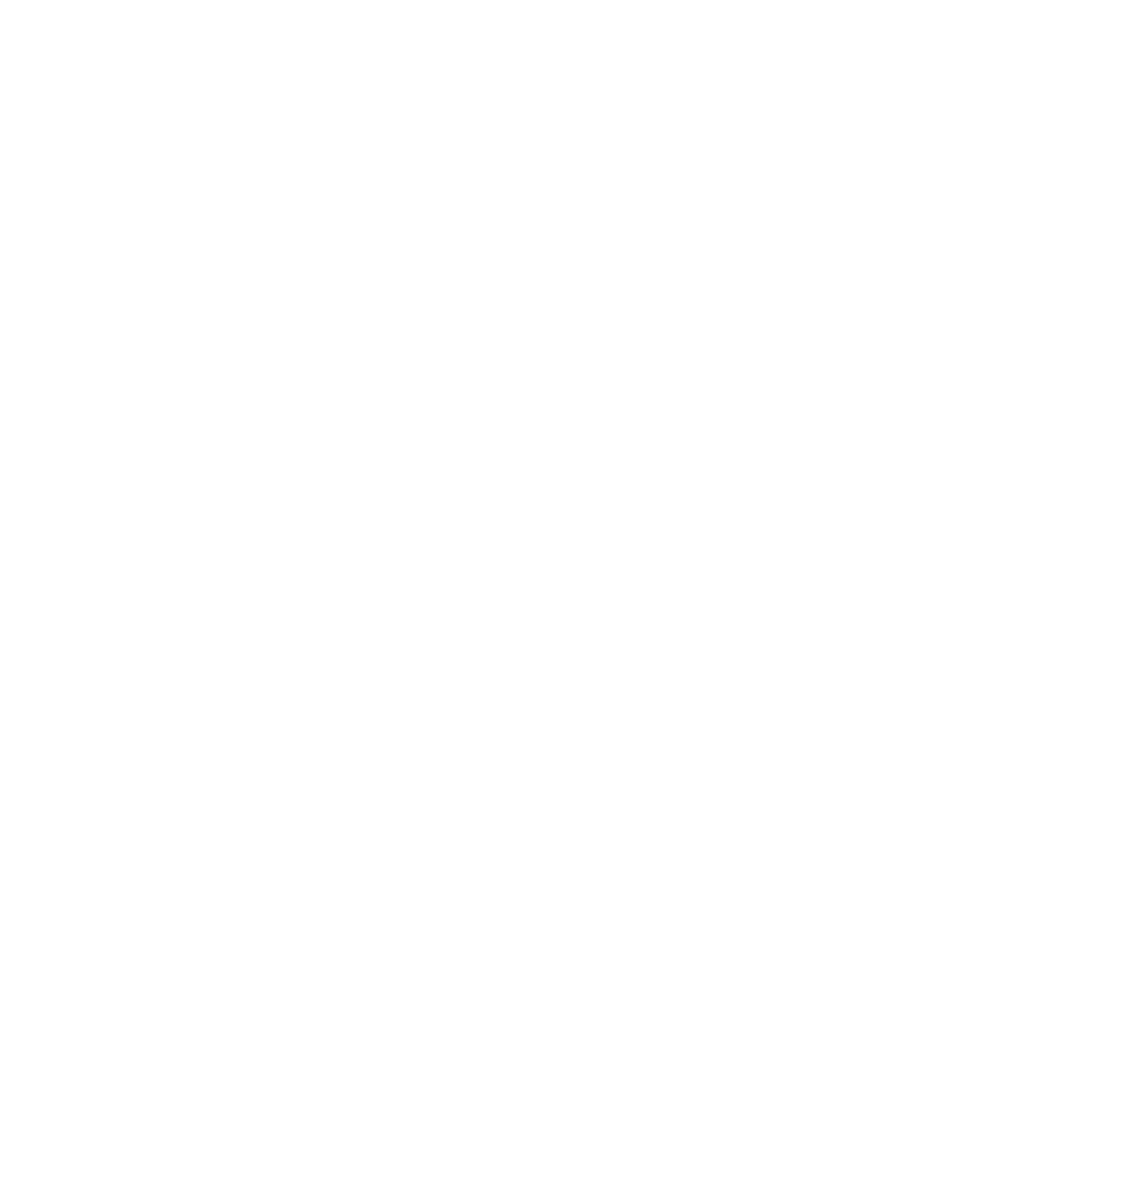 Sister Circle Logo - Spreading & Supporting Women's Circles Around the Globe